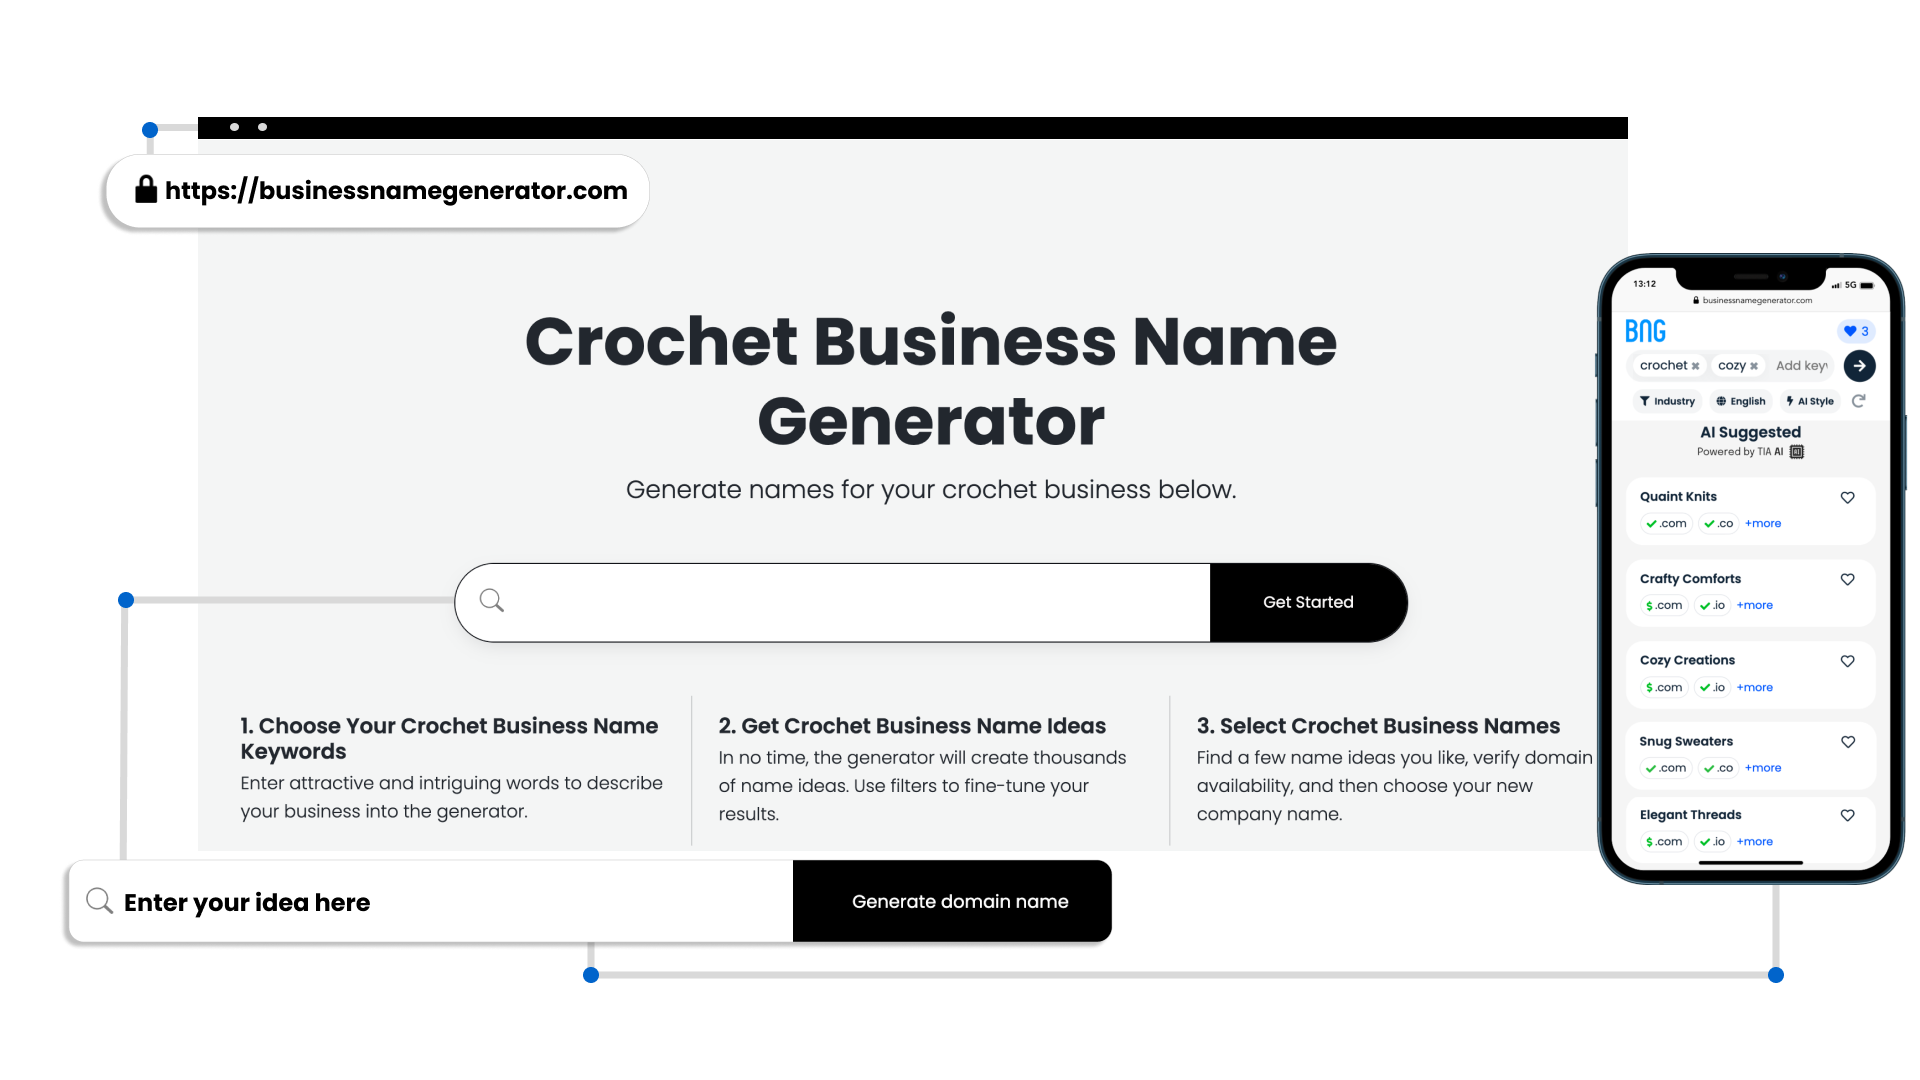 Benefits of our Crochet Business Name Generator